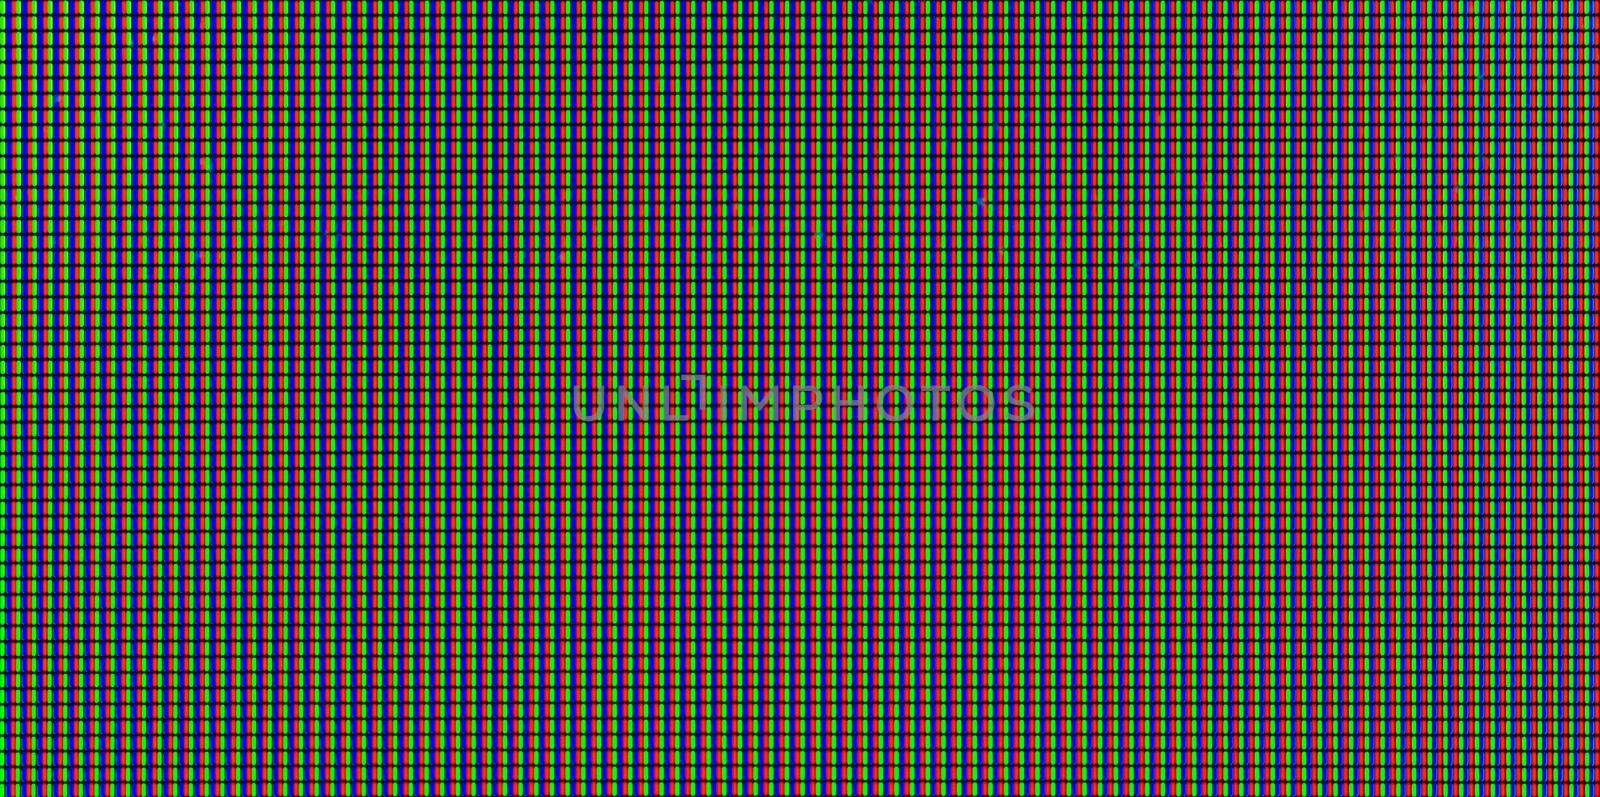 Macro shot of LCD computer screen displaying pure white, RGB pixels texture or background.